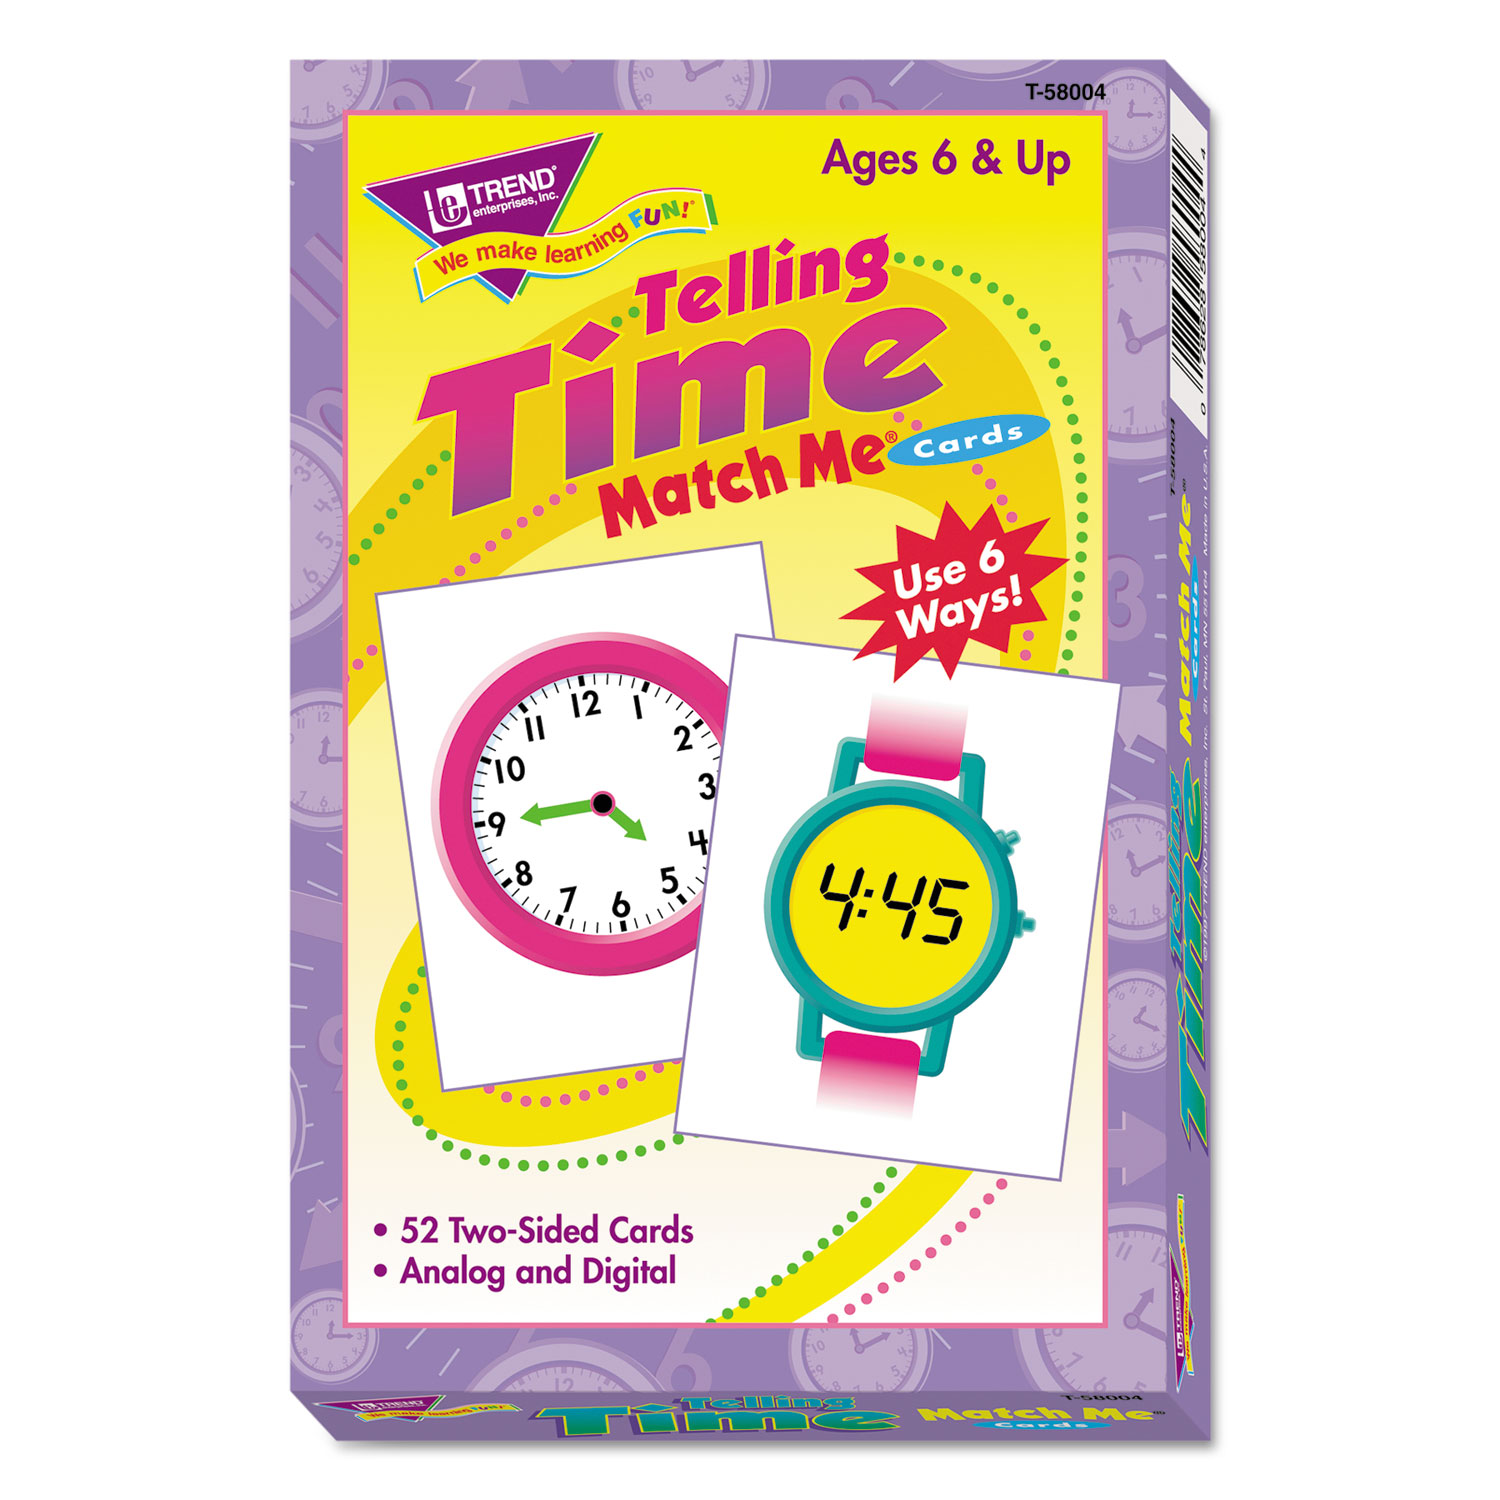  TREND T58004 Match Me Cards, Telling Time, 52 Cards, Ages 6 and Up (TEPT58004) 